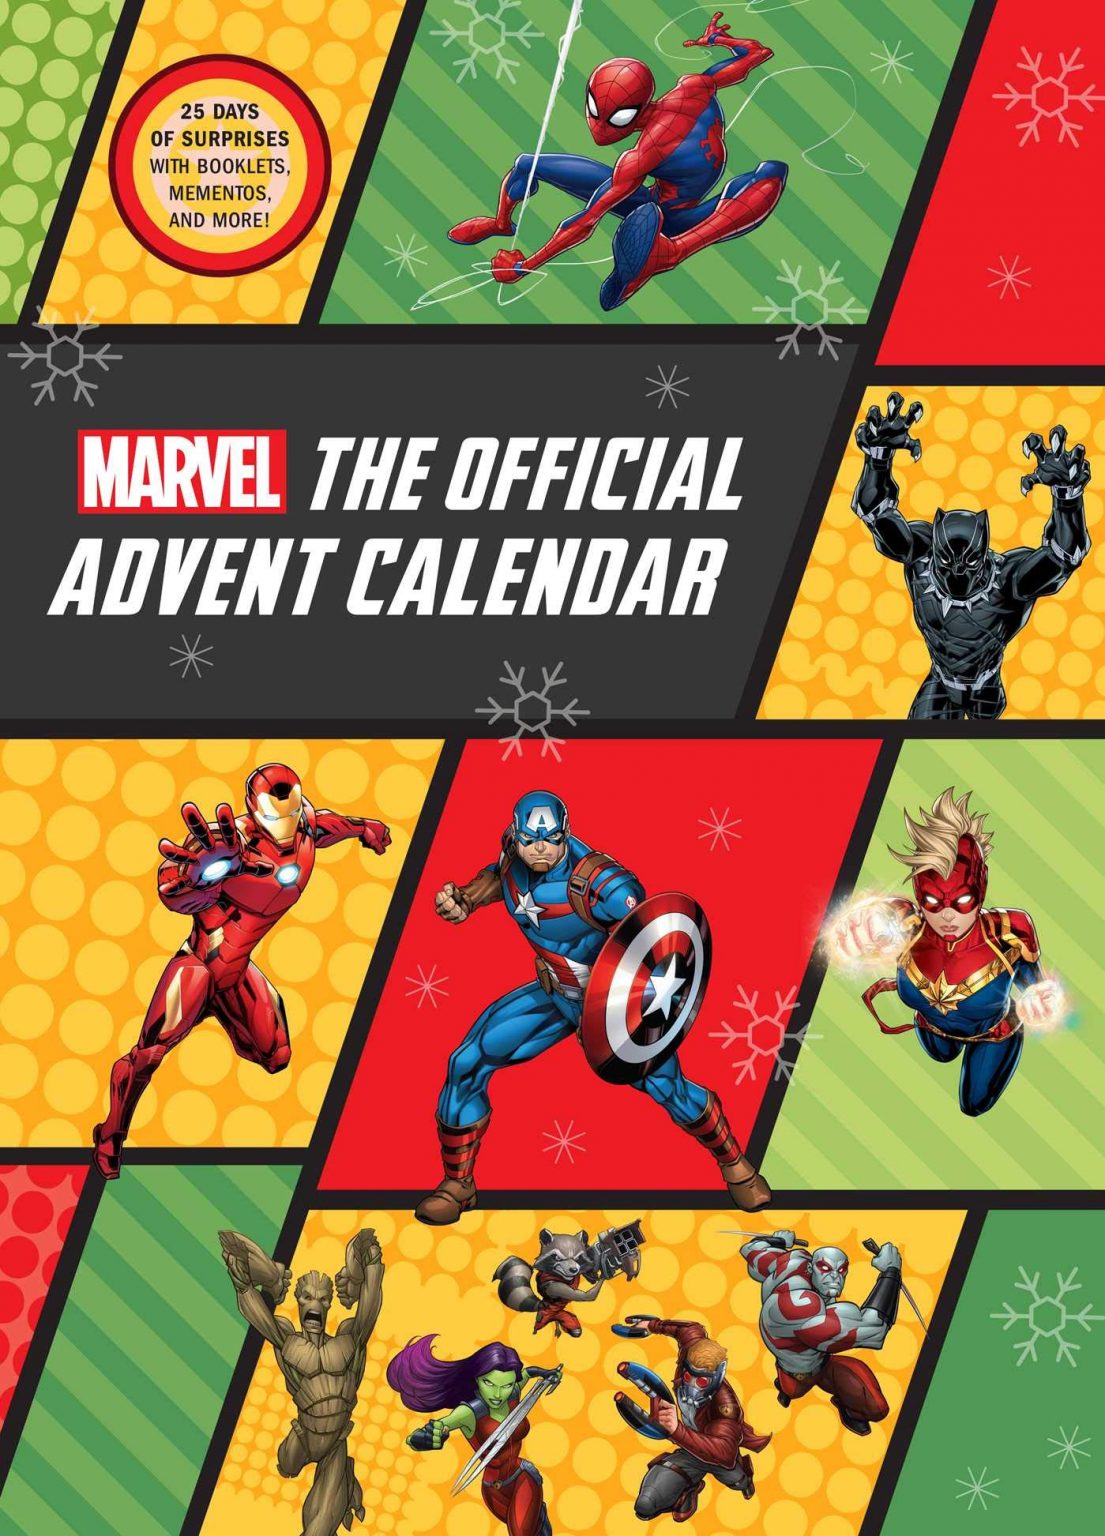 CHRISTMAS IN JULY: Let s Check Out MARVEL s Upcoming Advent Calendar